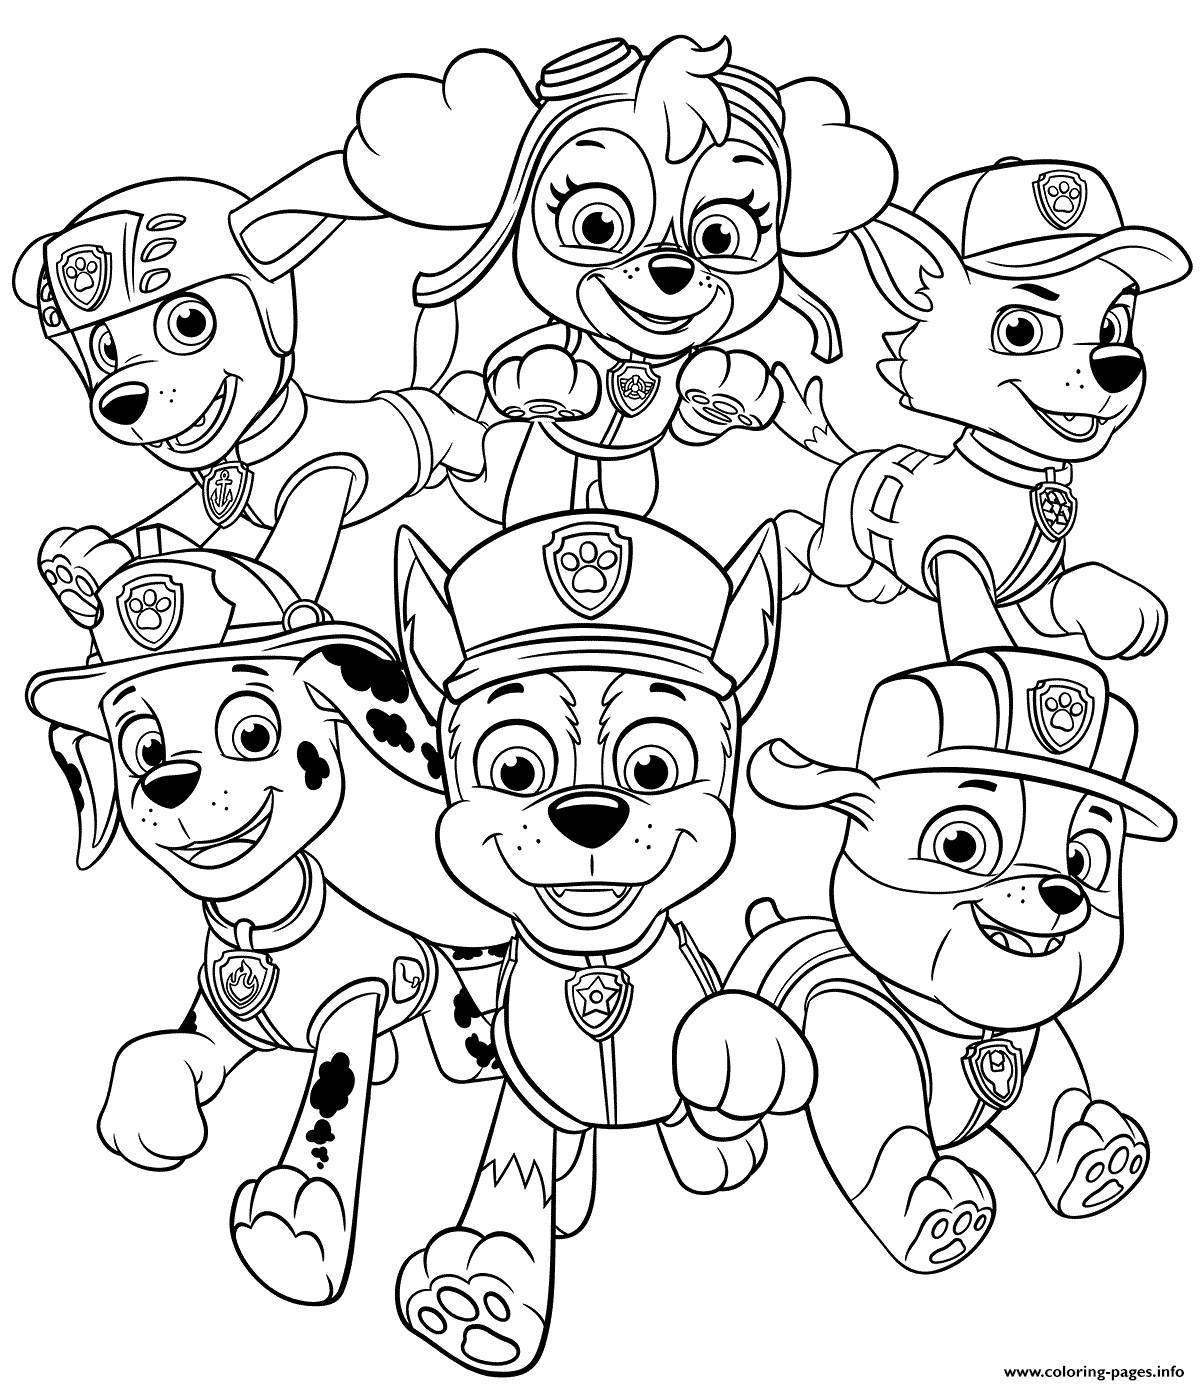 Paw patrol creative coloring new